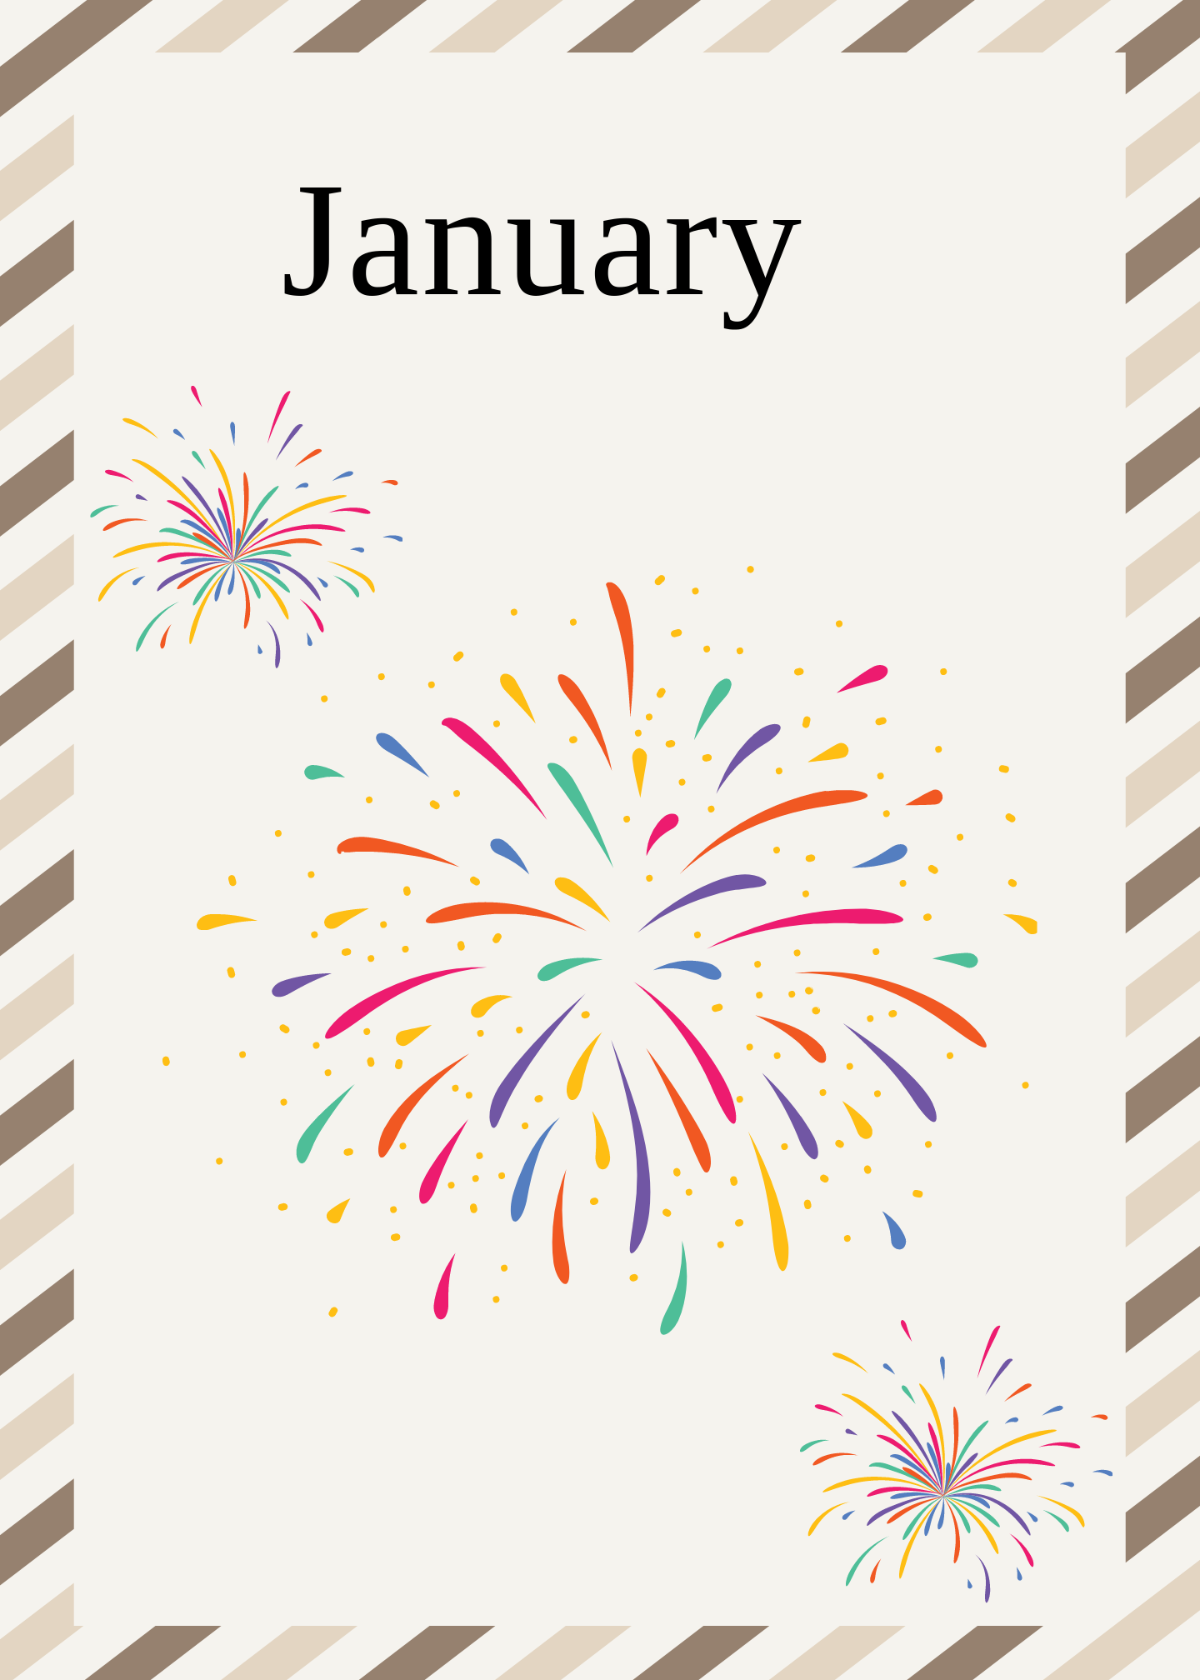 Months of The Year Flashcards Template